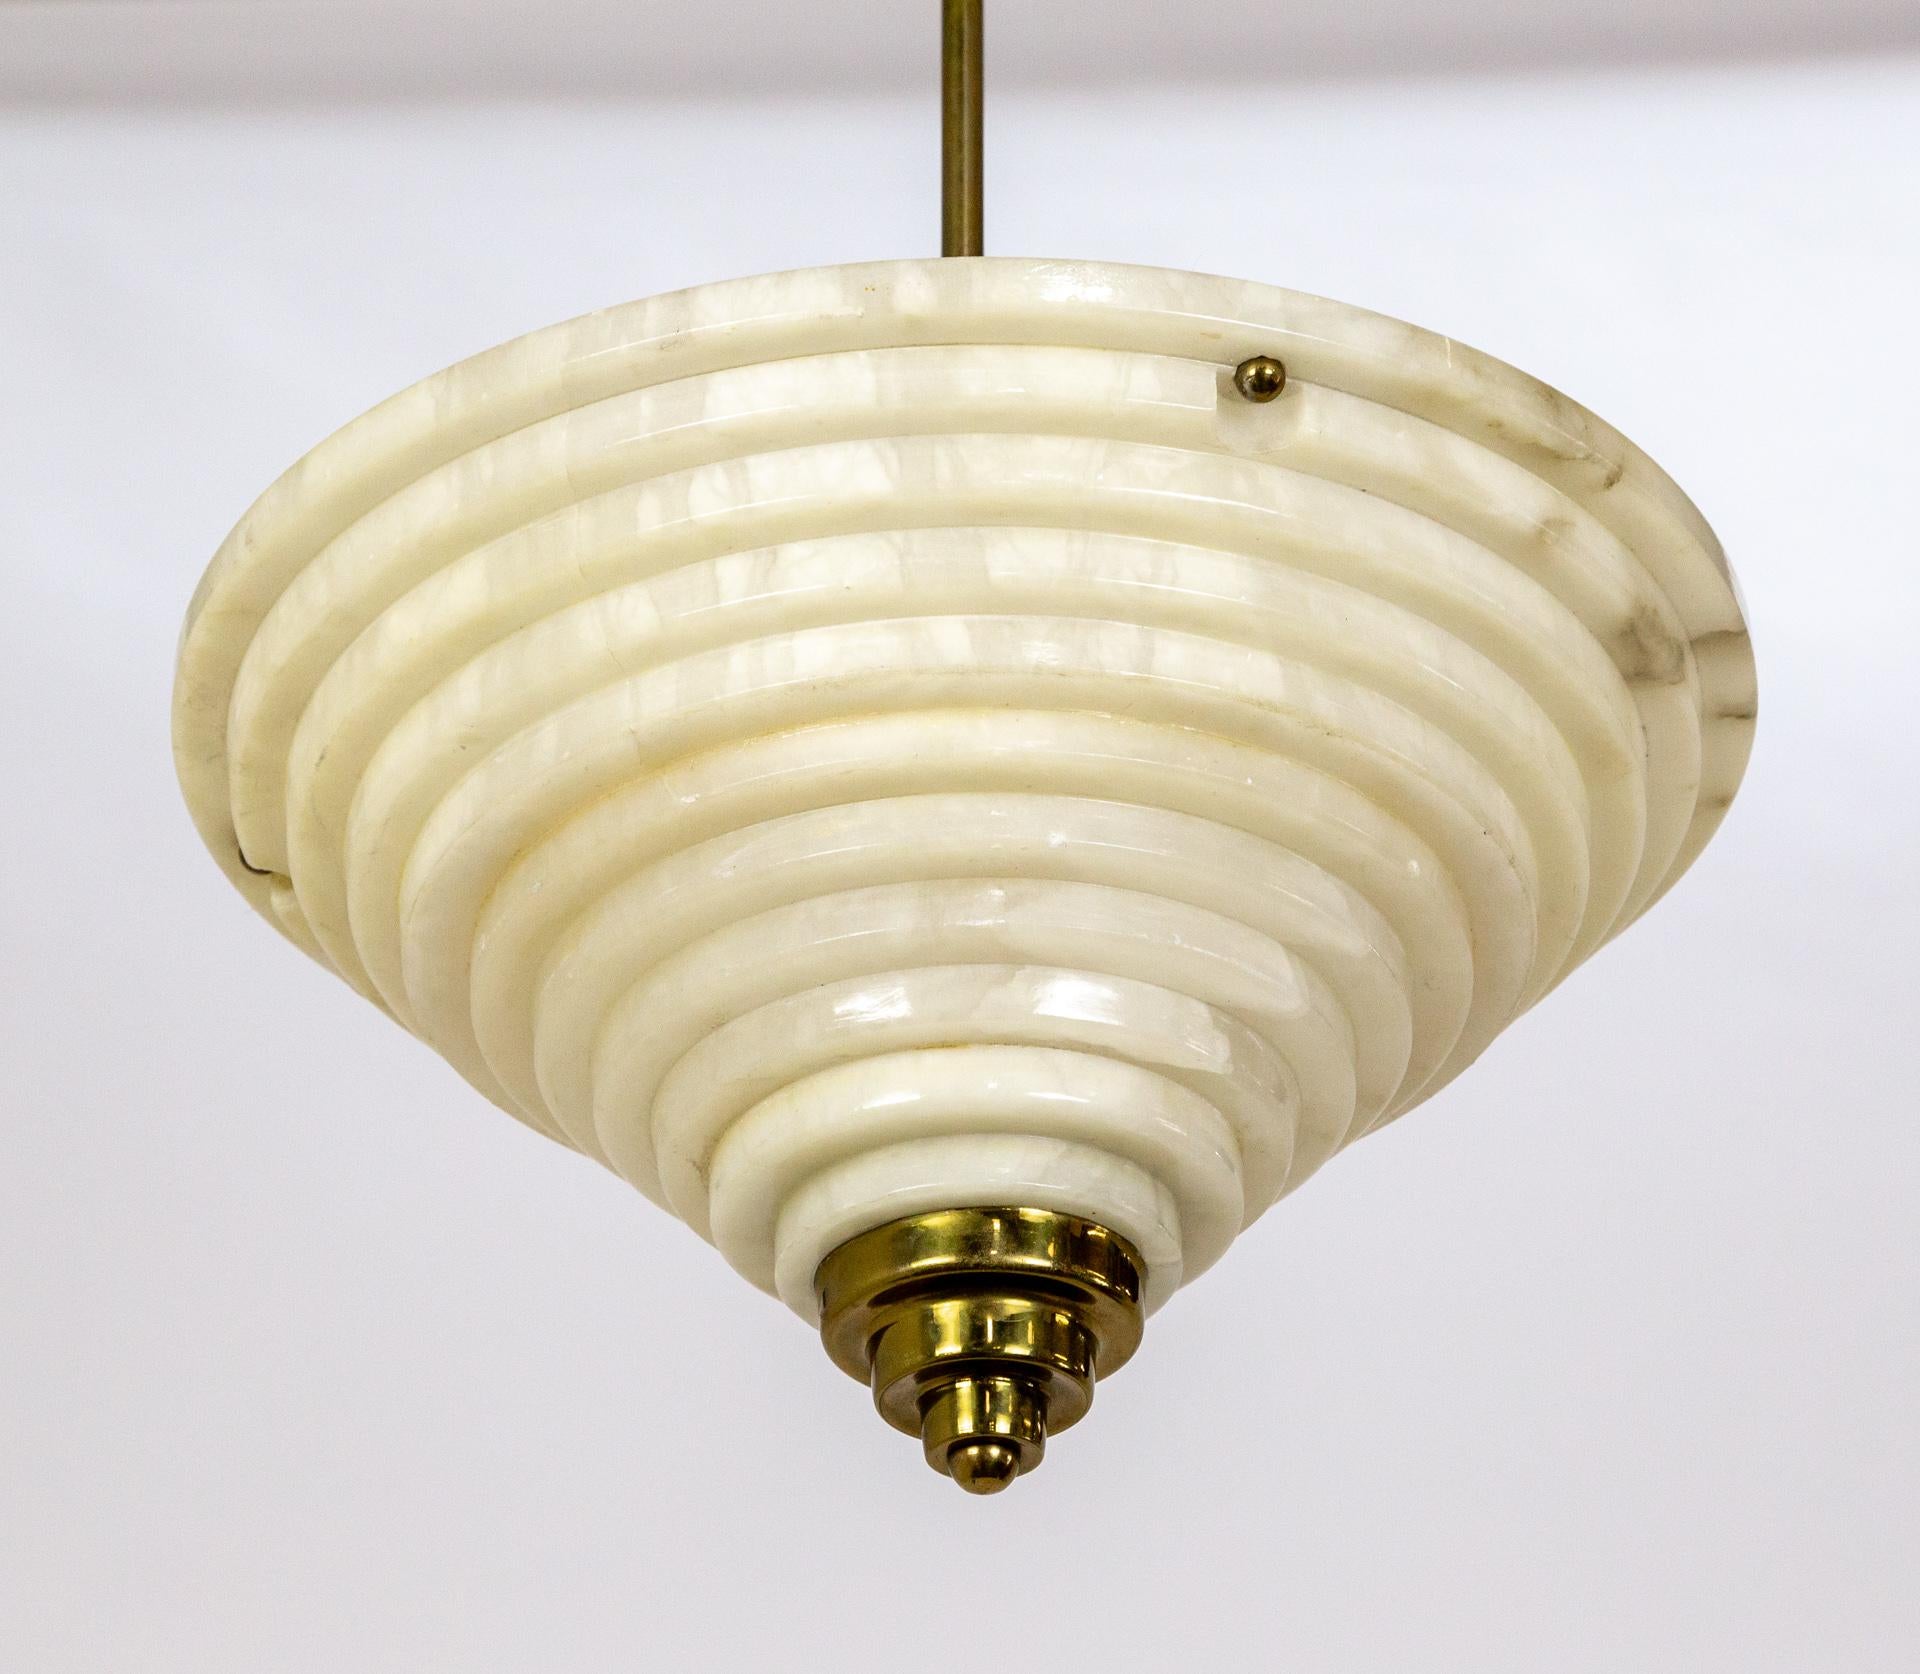 Deco Stepped Alabaster Pendant Light w/ Brass Finial For Sale 2